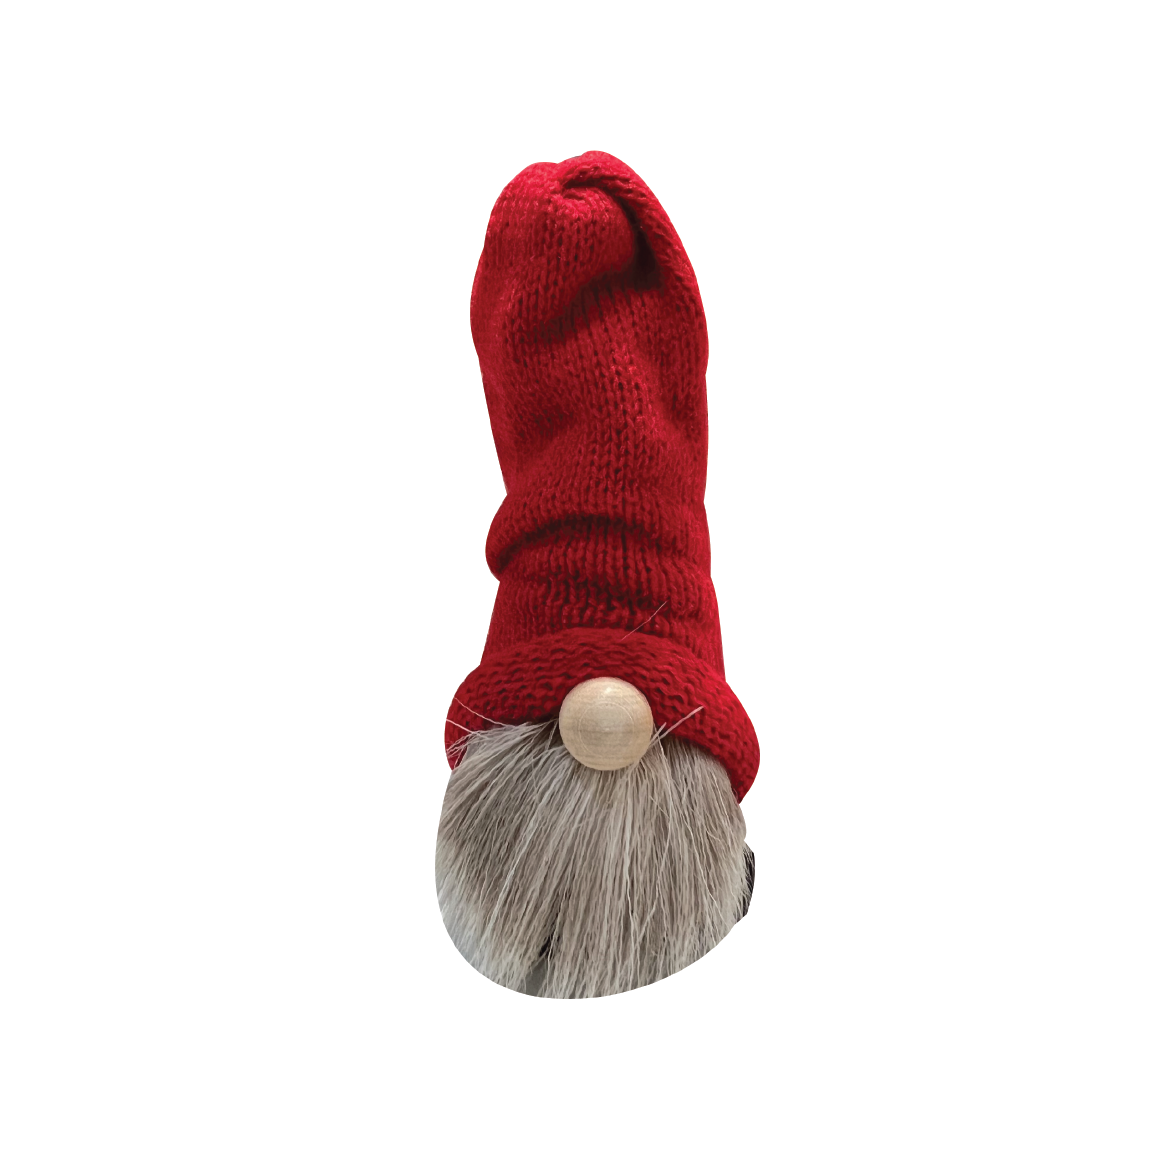 Tomte with Reindeer Beard, Knit Hat & Clogs